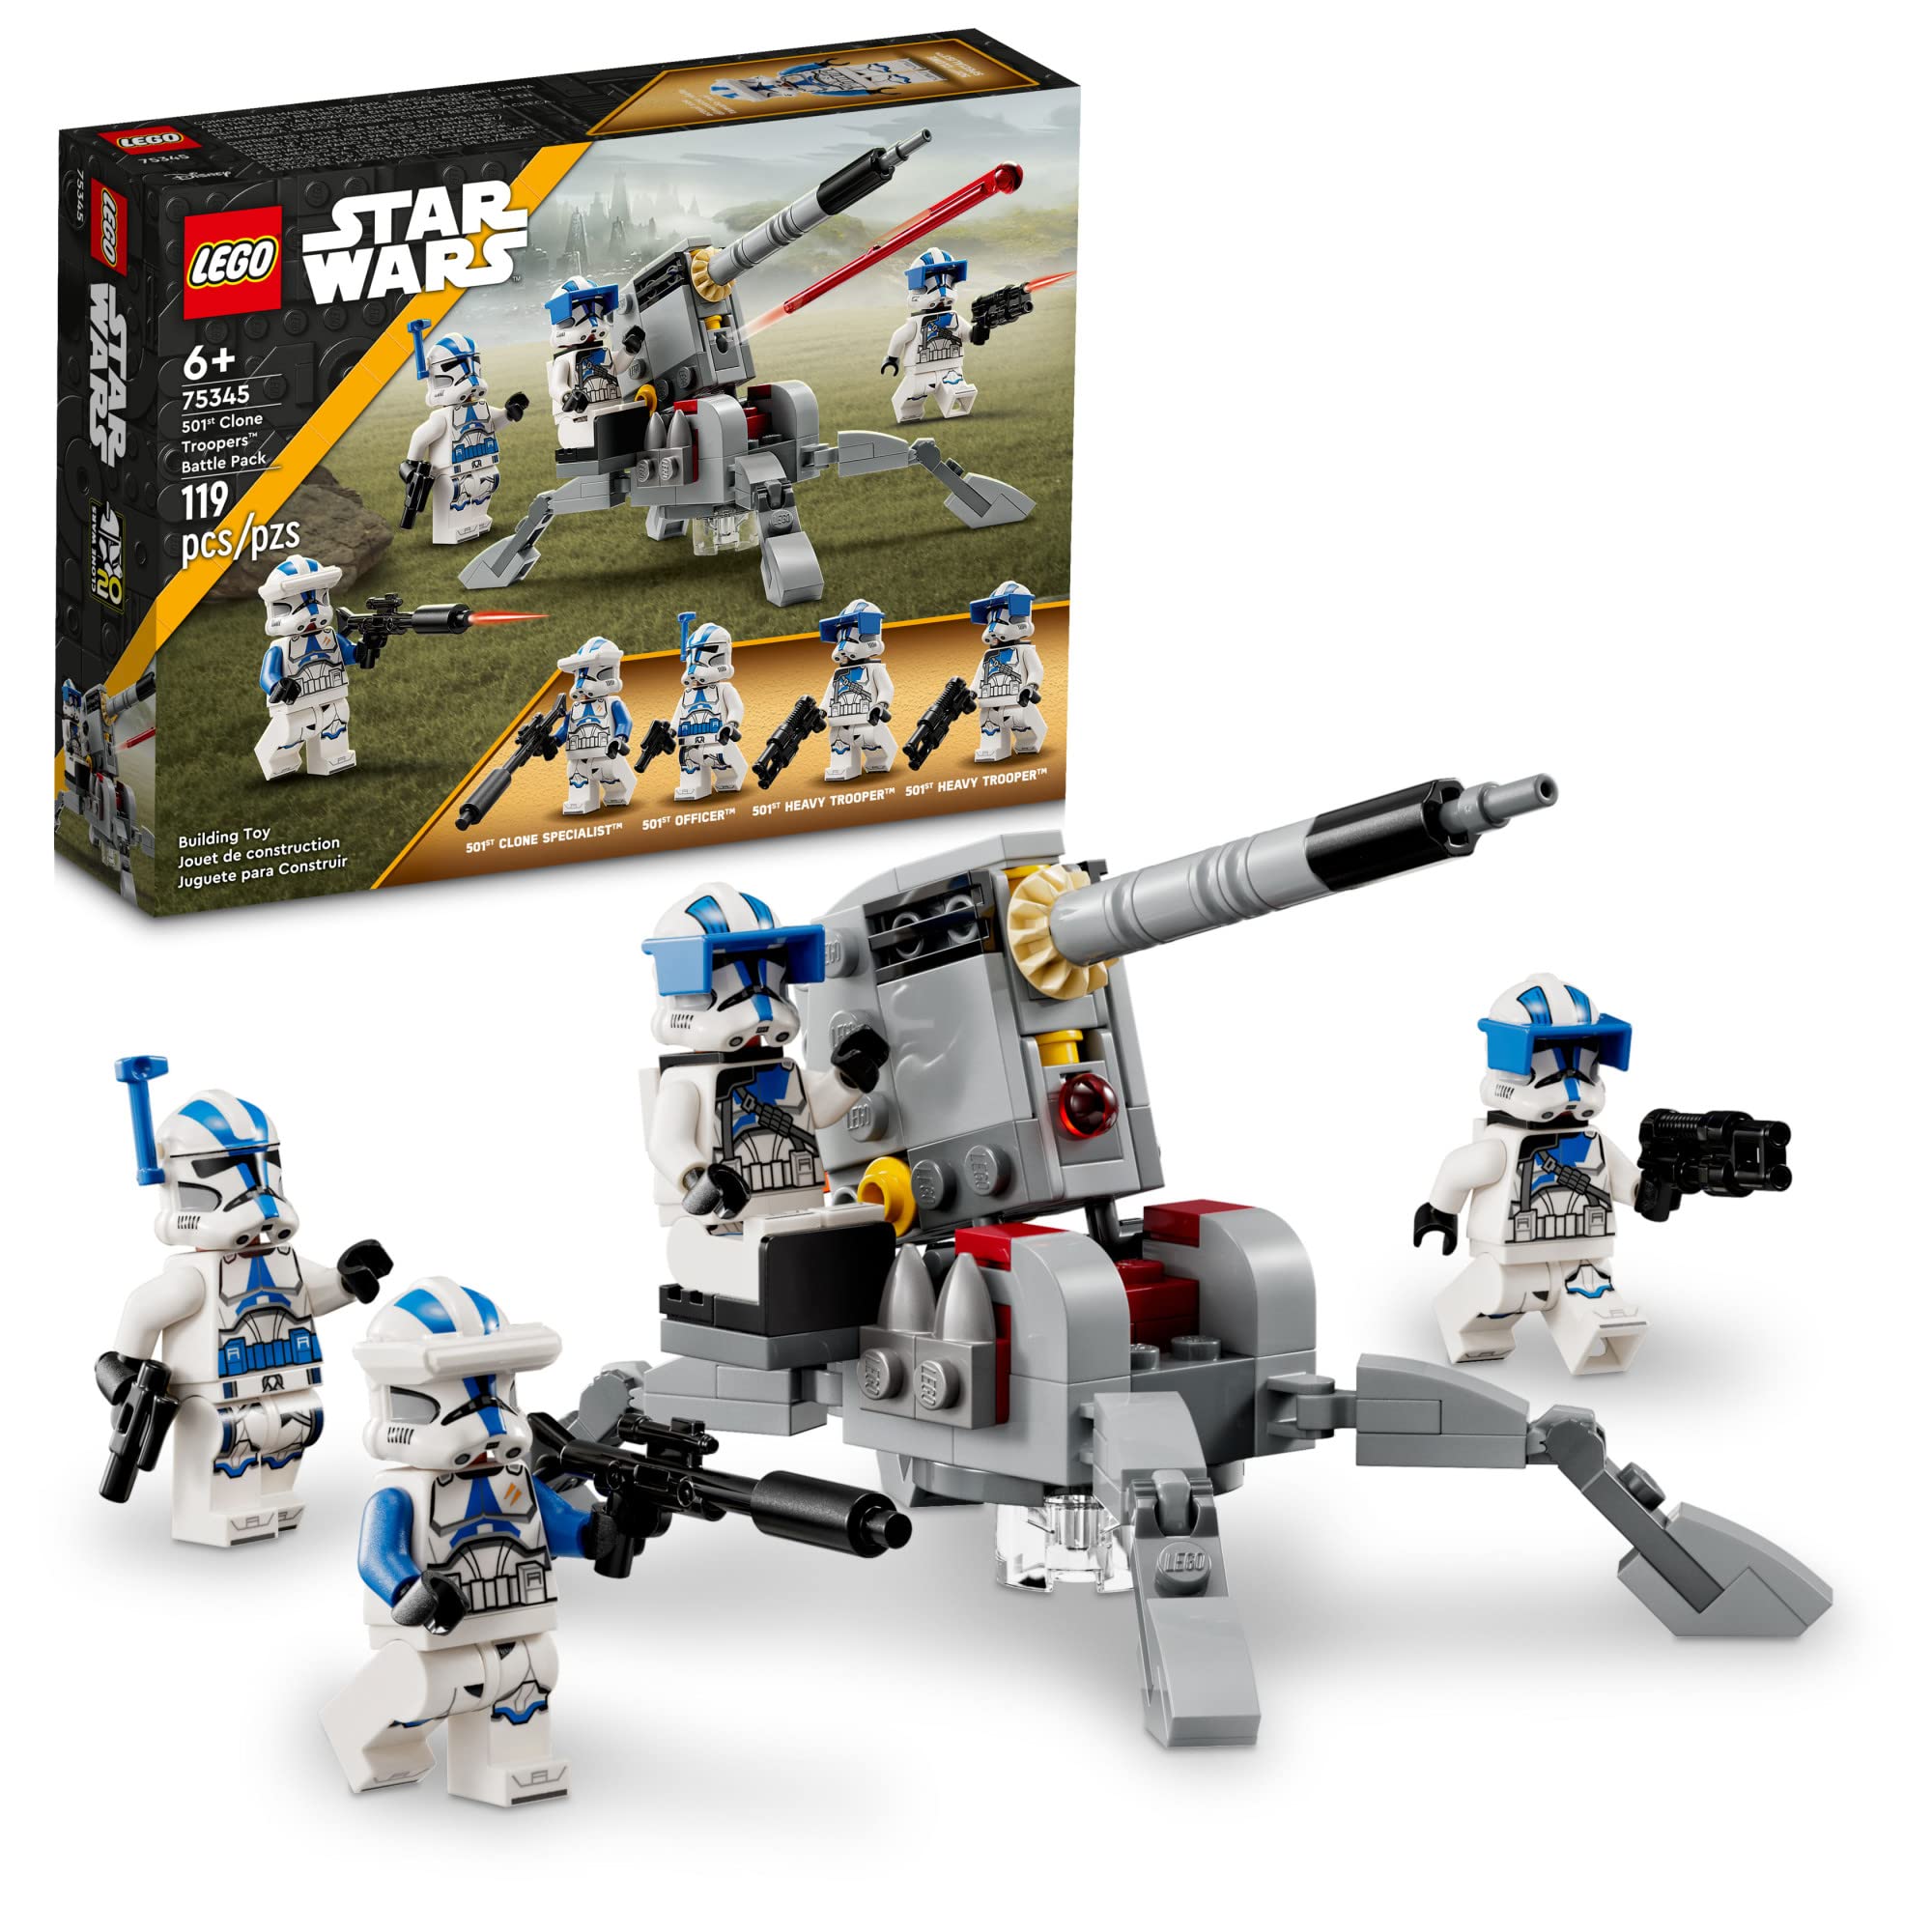 Lego Star Wars Clone Troopers Buildable Toy Set w/ 4 Minifigures (75345) $16, Lego Boba Fett's Starship Microfighter Set (75344) $8 + FS w/ Walmart+ or Free Store Pickup at Walmart